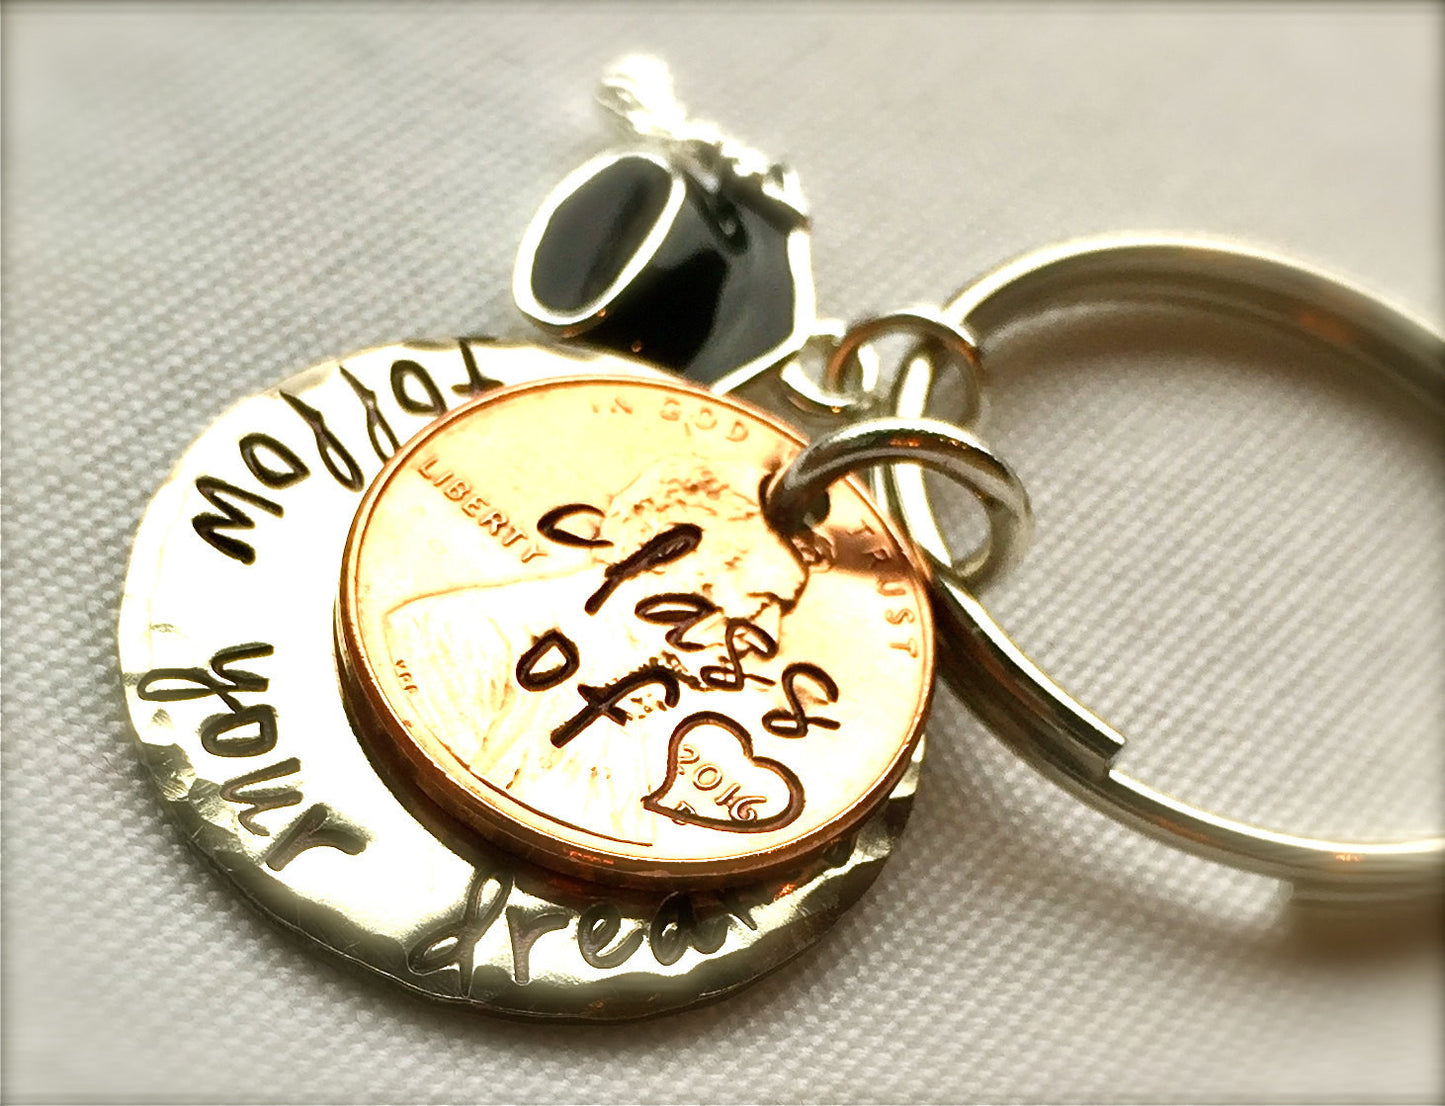 Graduation Gift 2016, Personalized Penny Keychains - Natashaaloha, jewelry, bracelets, necklace, keychains, fishing lures, gifts for men, charms, personalized, 